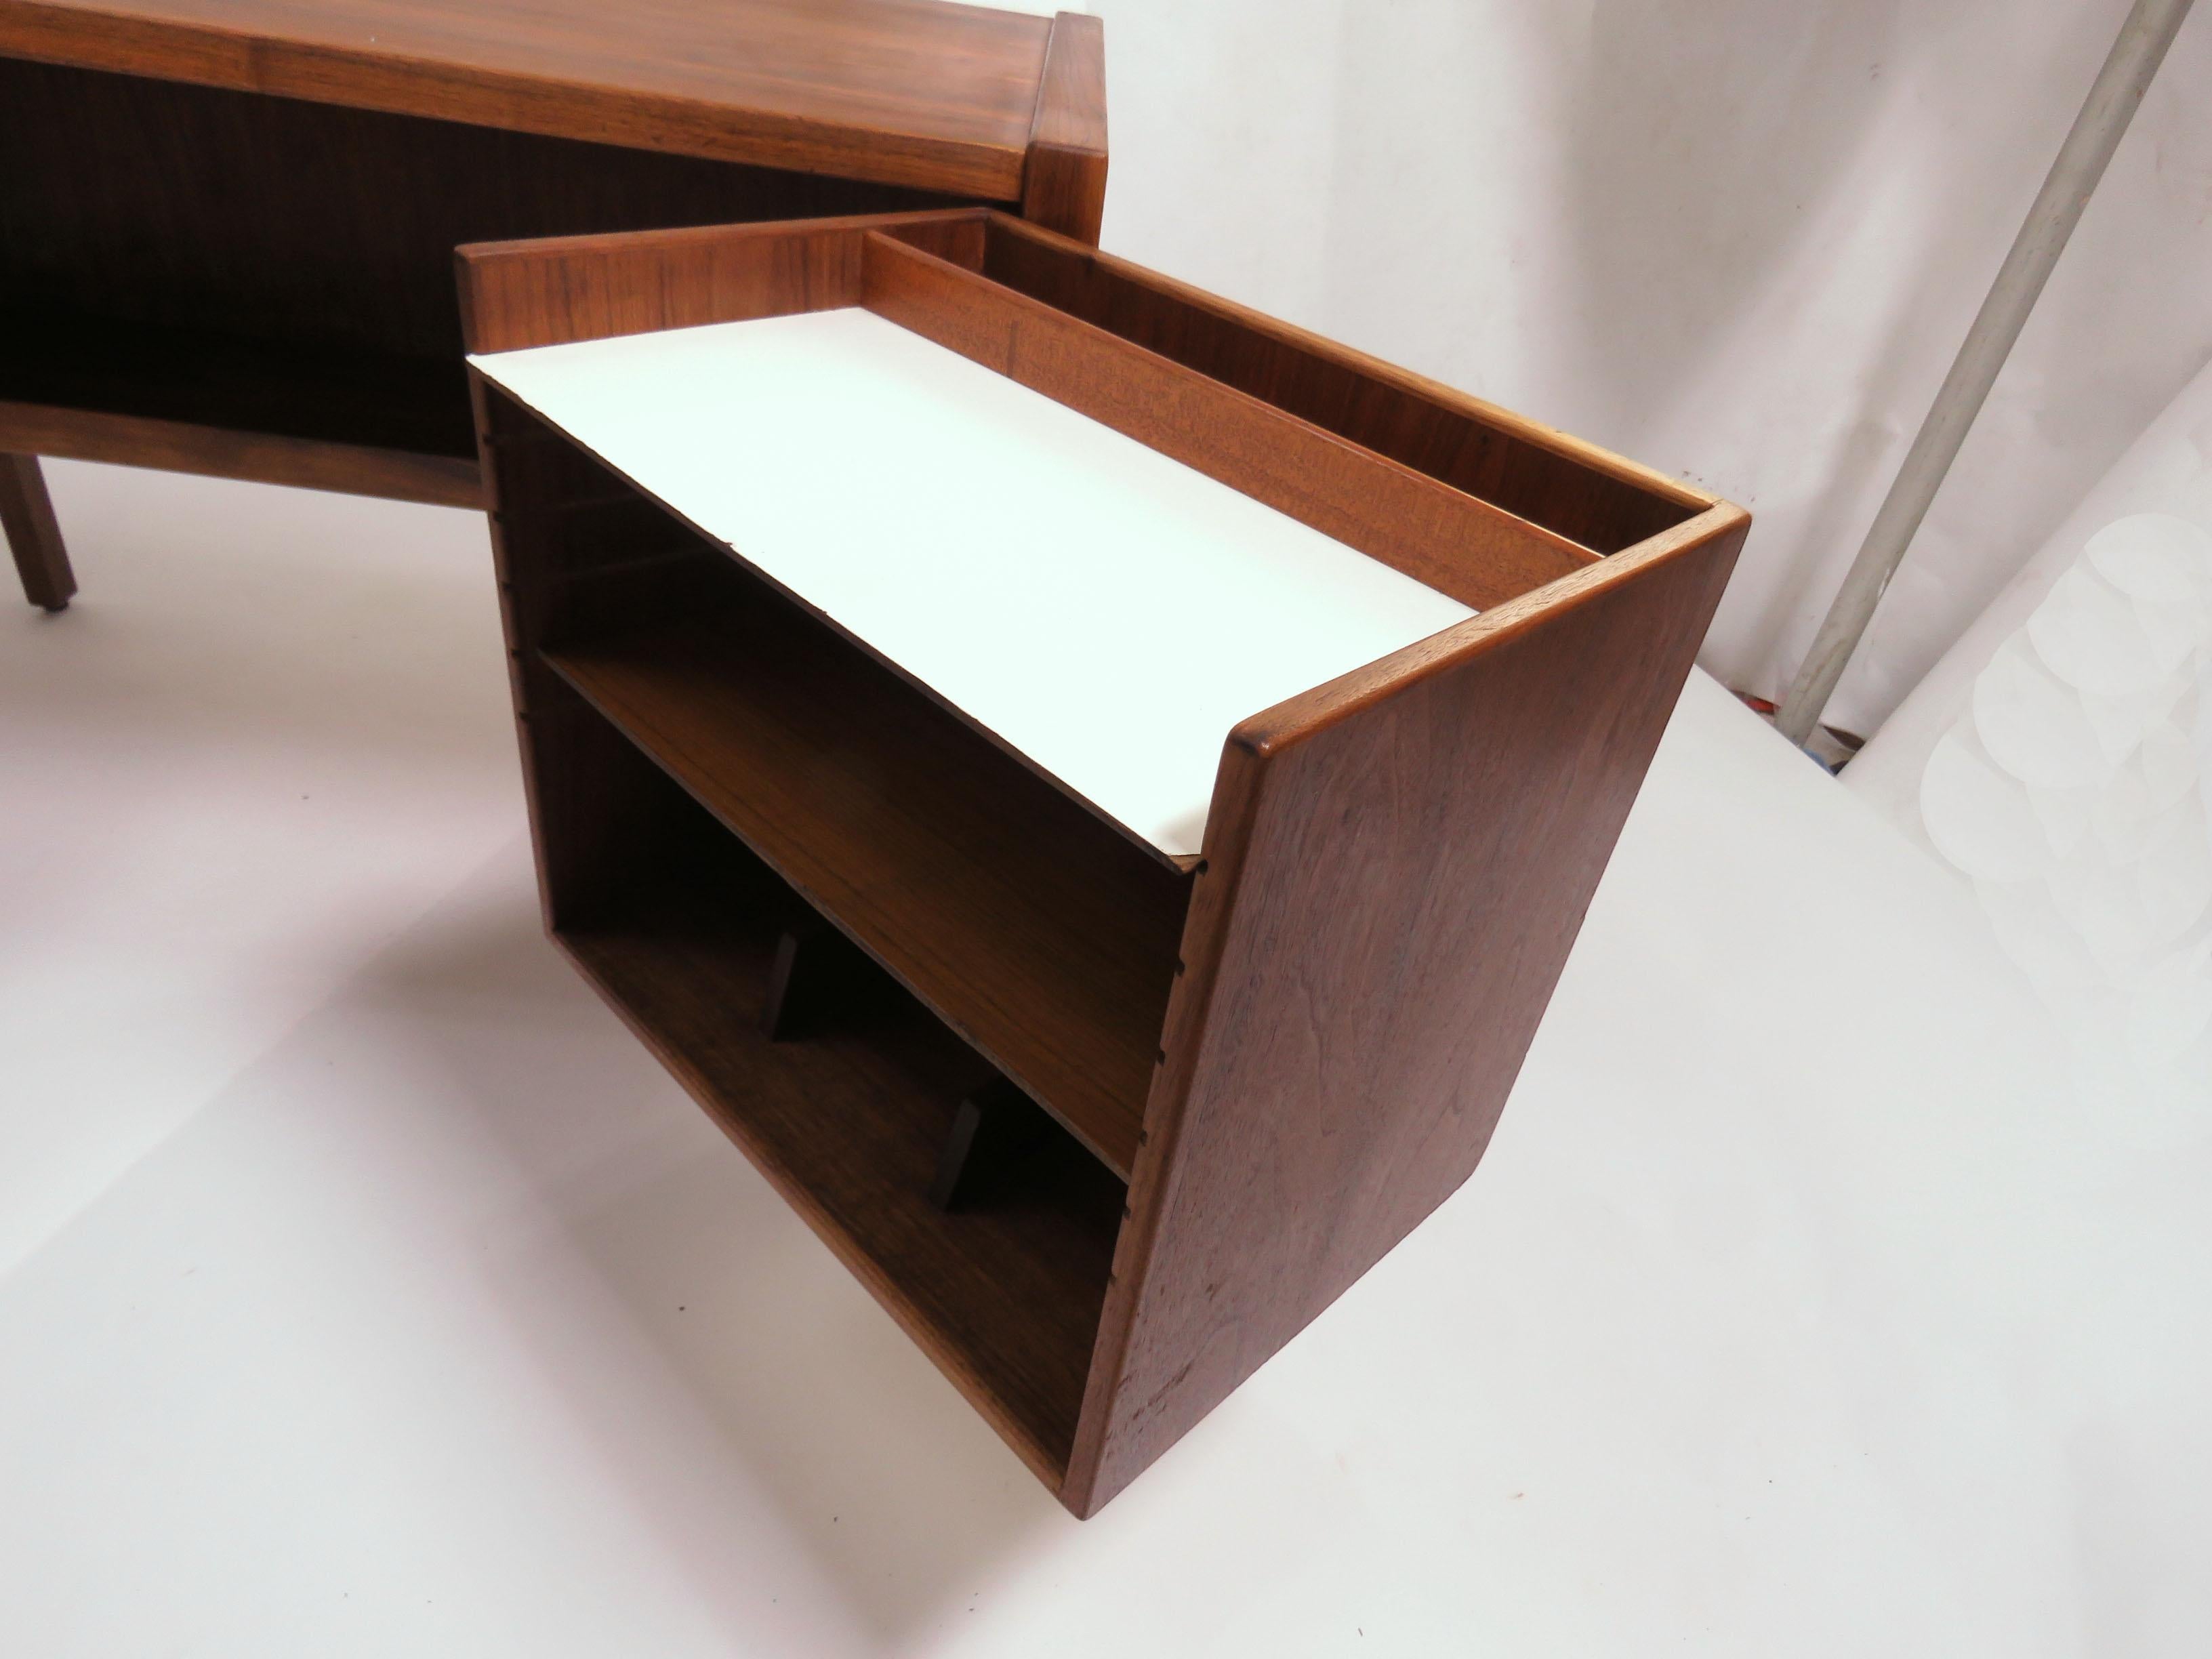 Mid-20th Century Jens Risom Executive Work Station Desk with Optional Return, circa 1960s